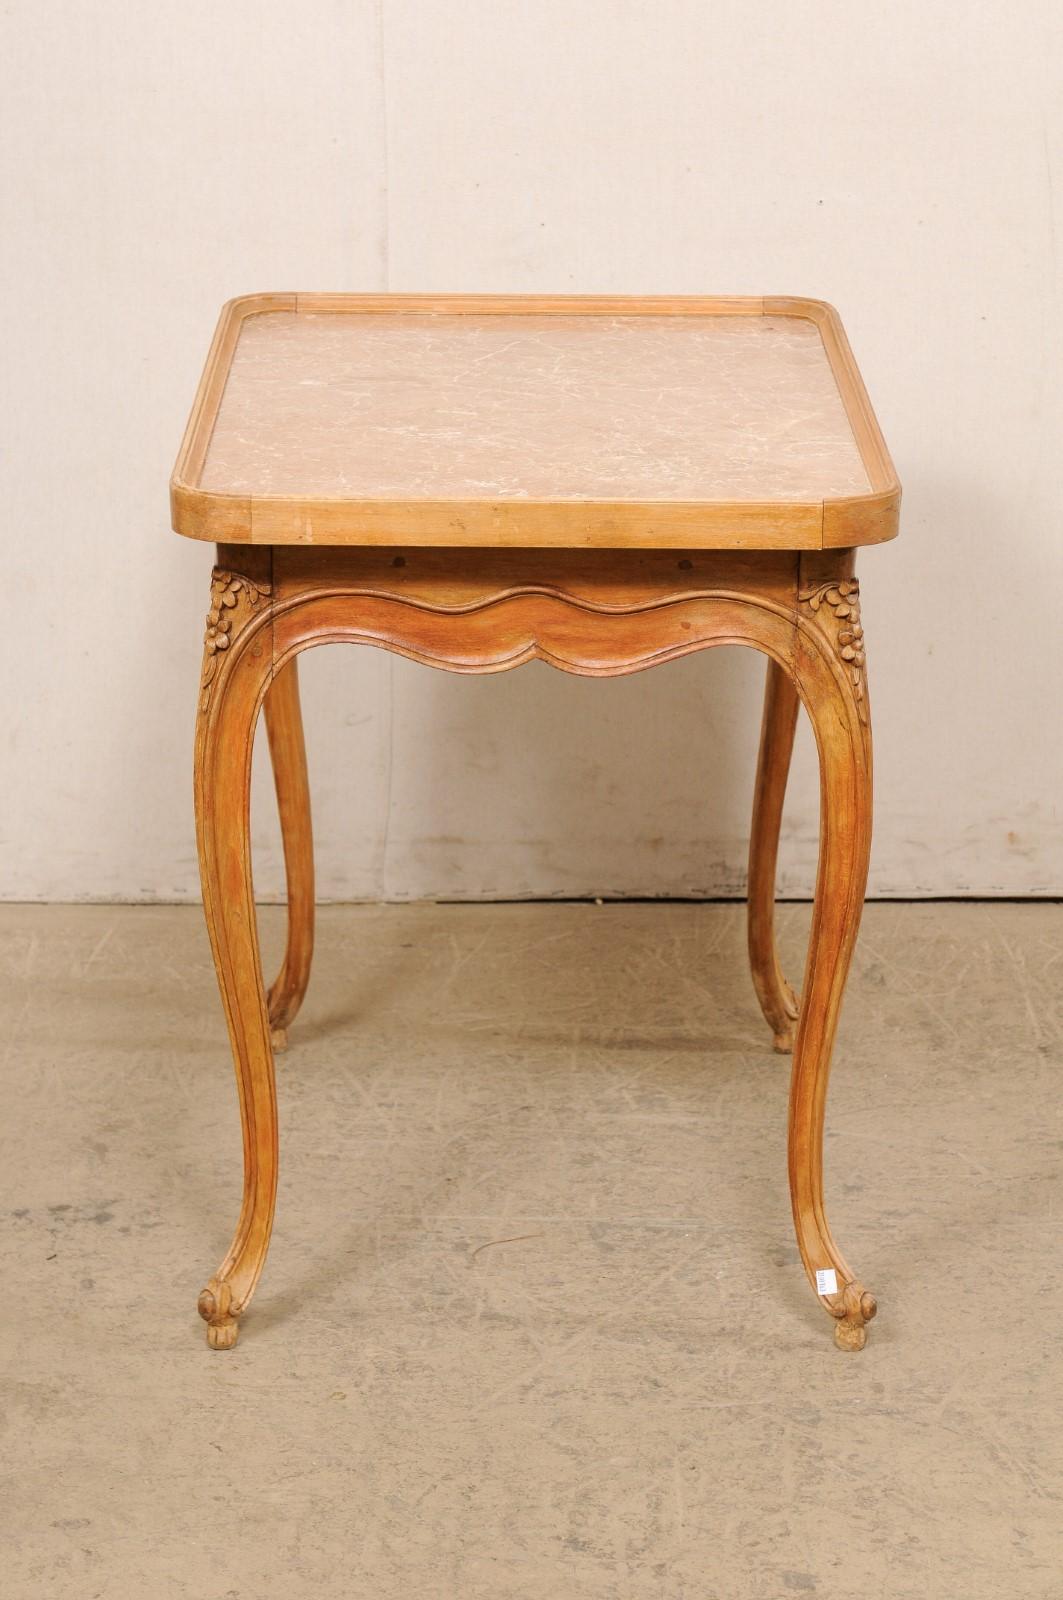 Late 18th Century French Marble-Top Carved-Wood Occasional Table with Drawer In Good Condition For Sale In Atlanta, GA